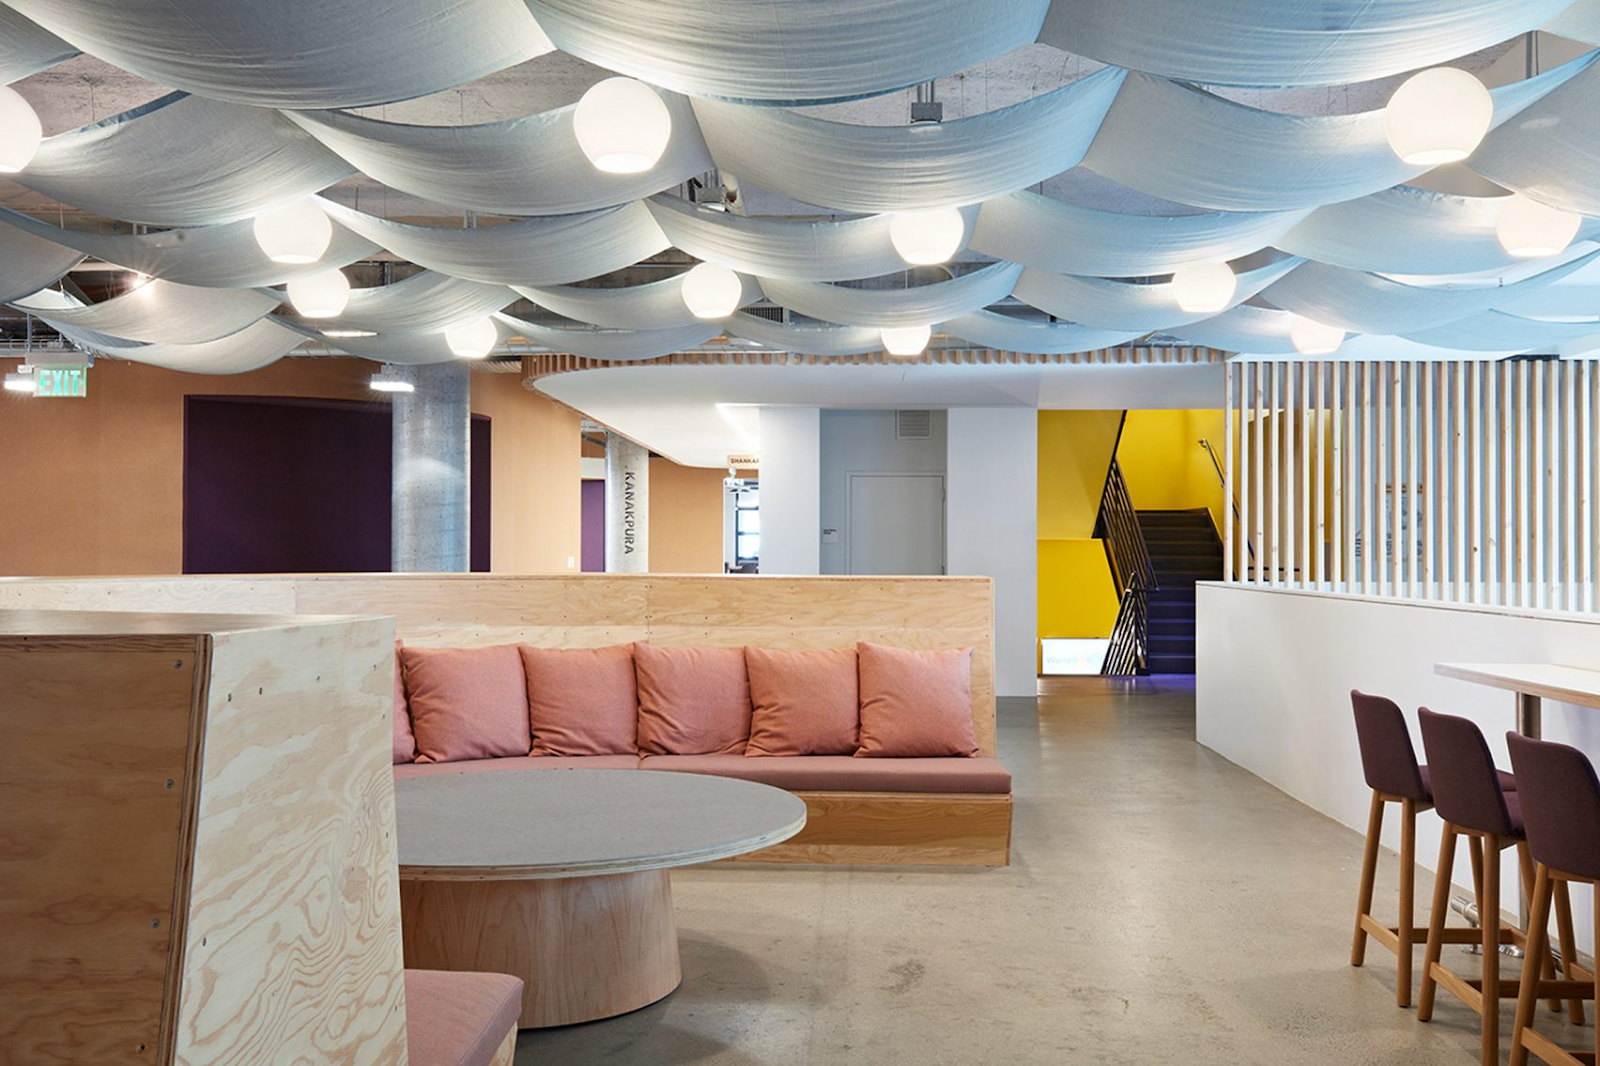 Comfortable lounge area with light pastel colors and wavy ceiling tapestries in Airbnb's HQ in San Francisco